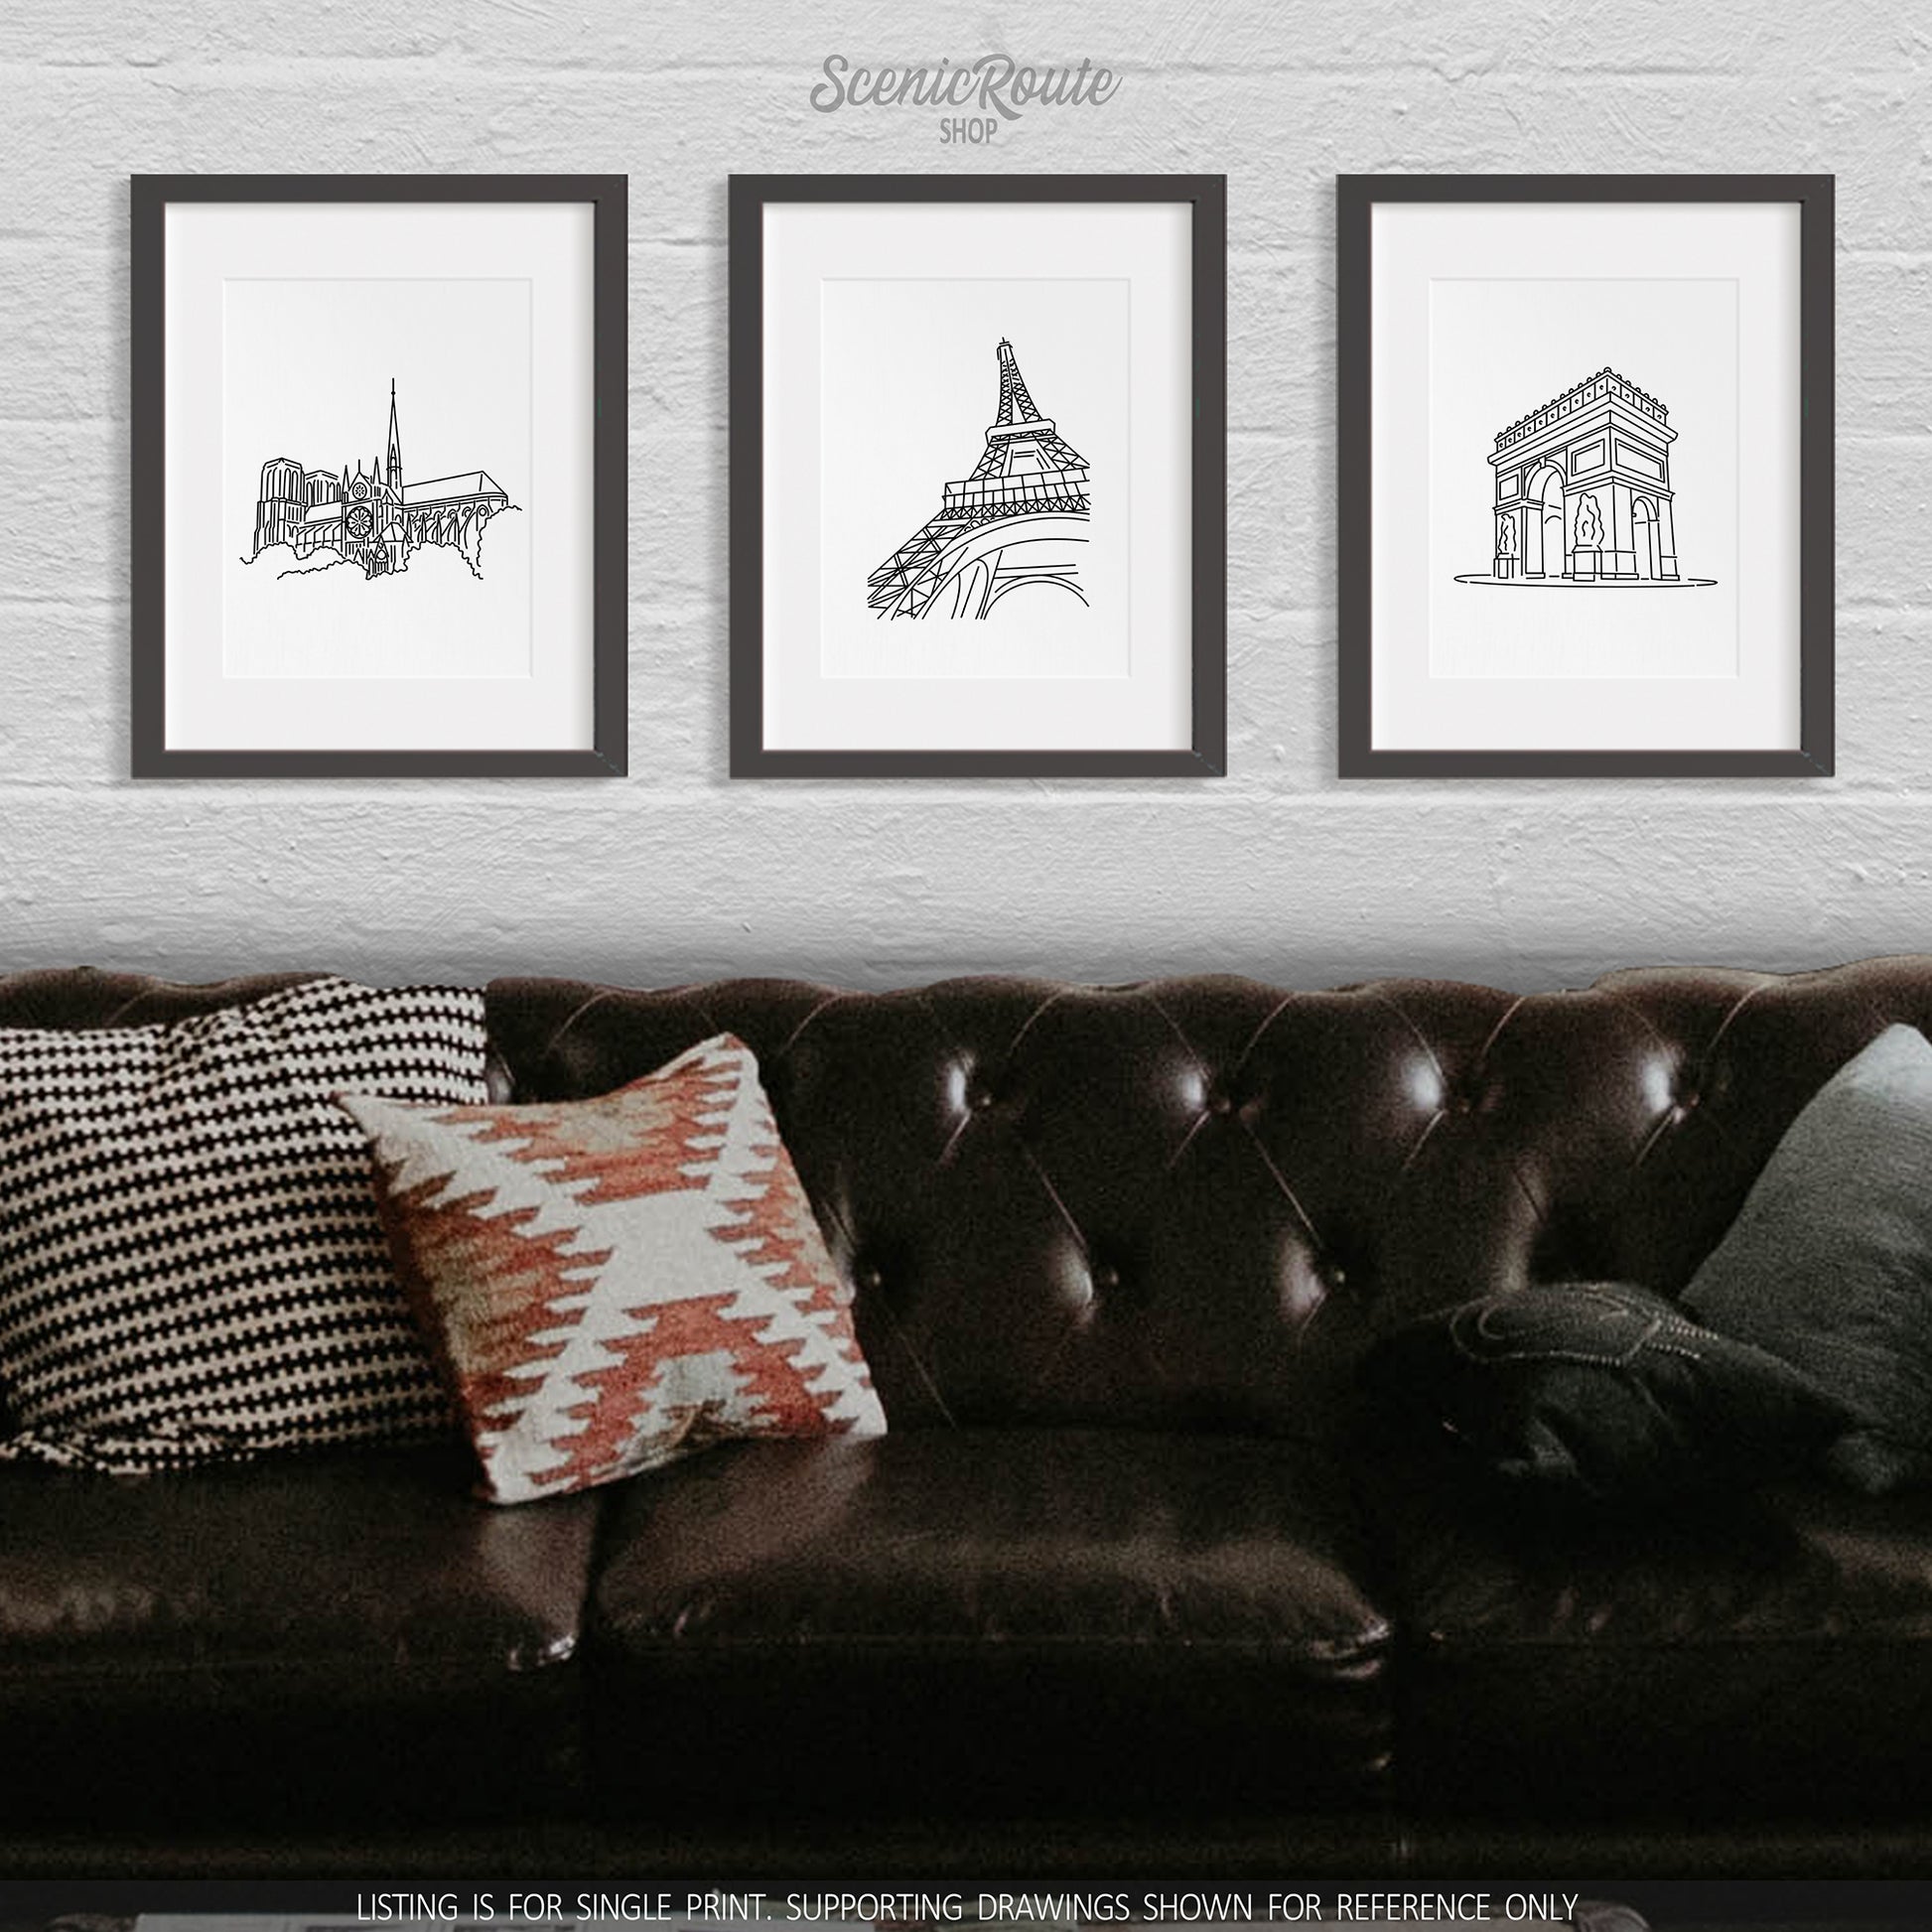 A group of three framed drawings on a wall above a couch. The line art drawings include Notre Dame Cathedral, the Eiffel Tower, and the Arc de Triomphe